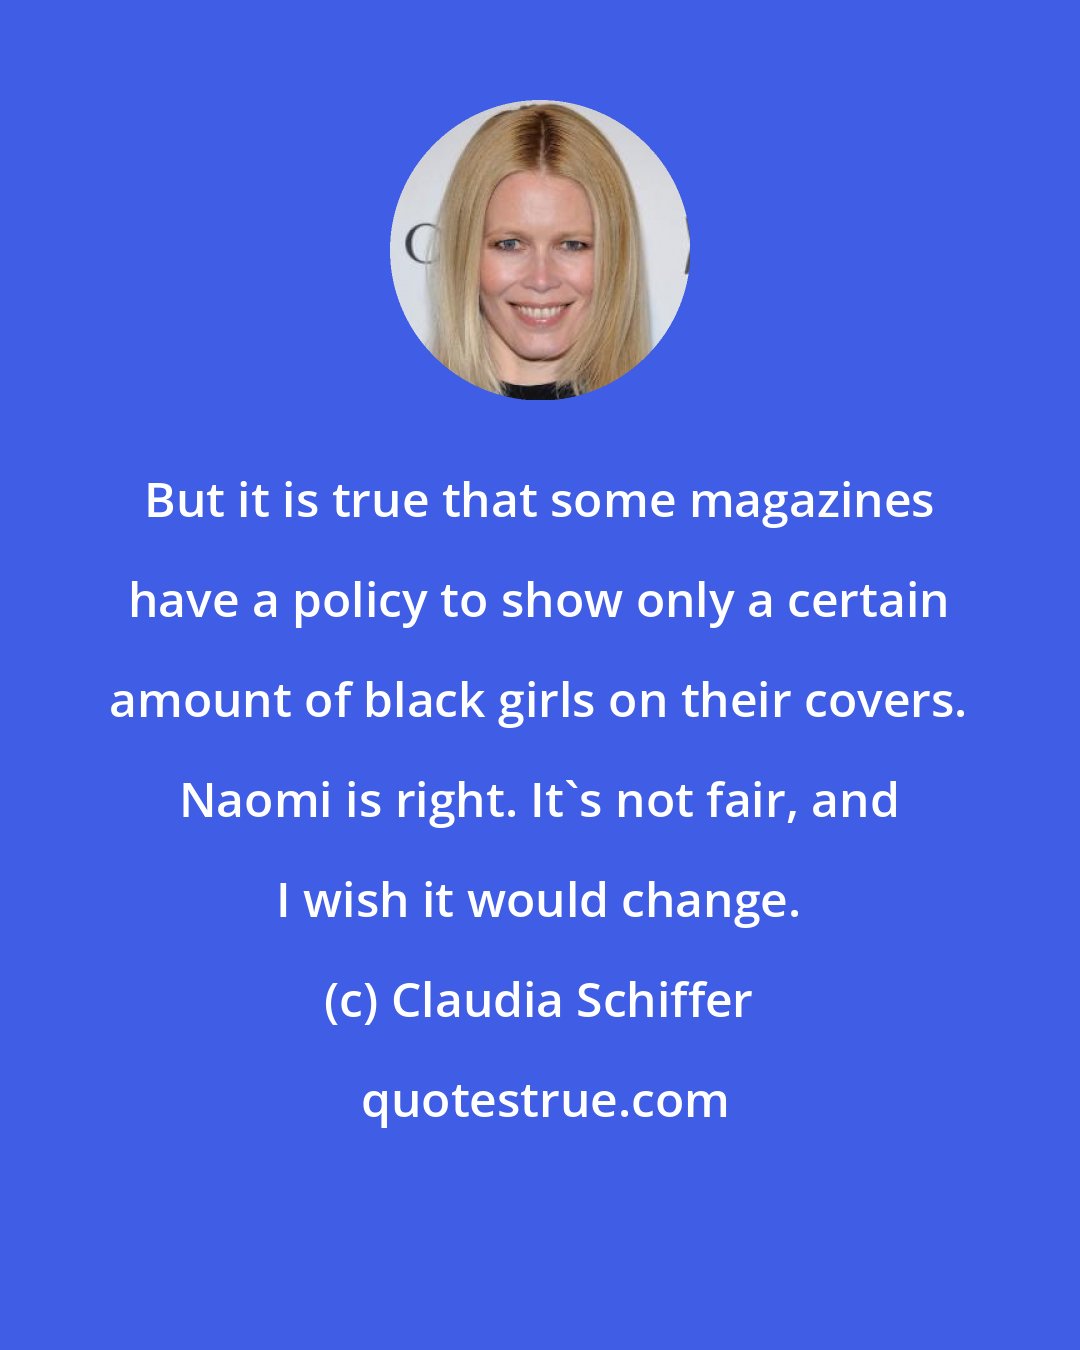 Claudia Schiffer: But it is true that some magazines have a policy to show only a certain amount of black girls on their covers. Naomi is right. It's not fair, and I wish it would change.